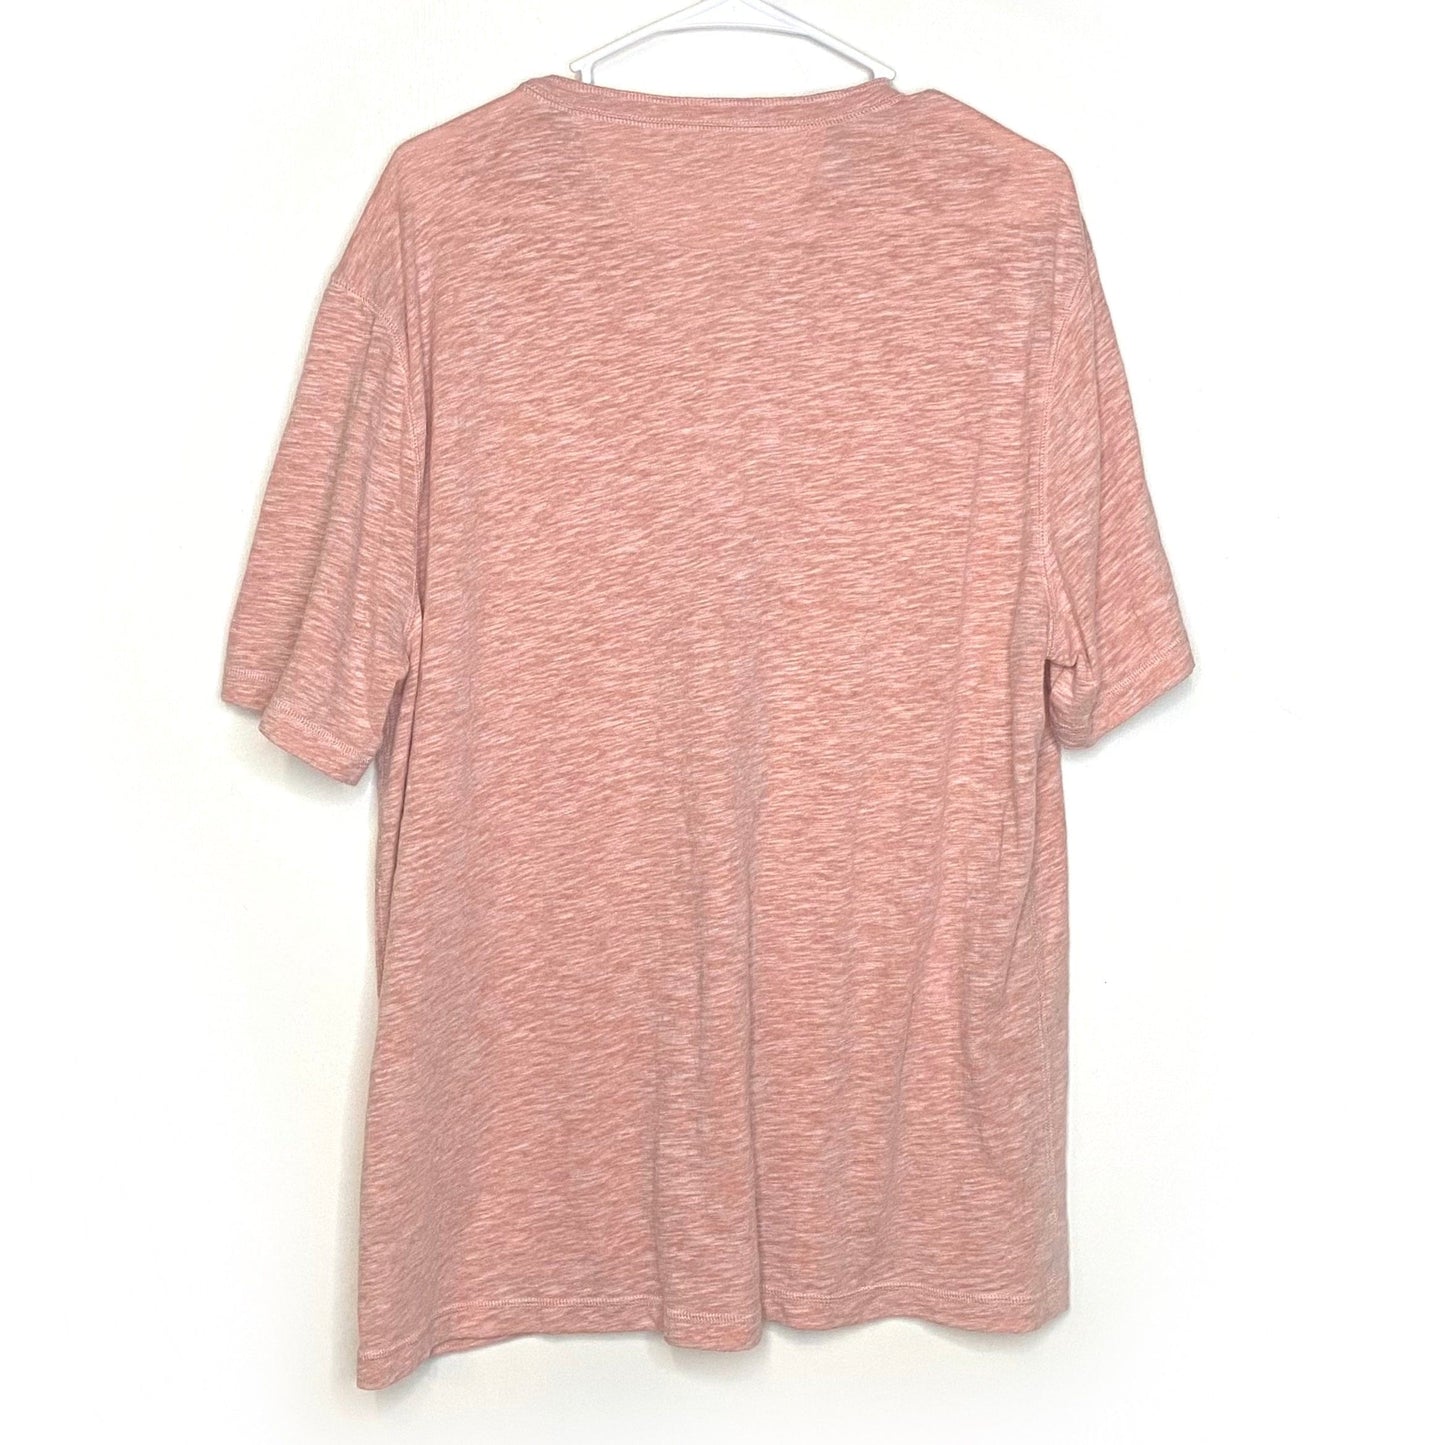 Faherty Mens Size XL Light Heather Peach Henley T-Shirt S/s Pre-Owned